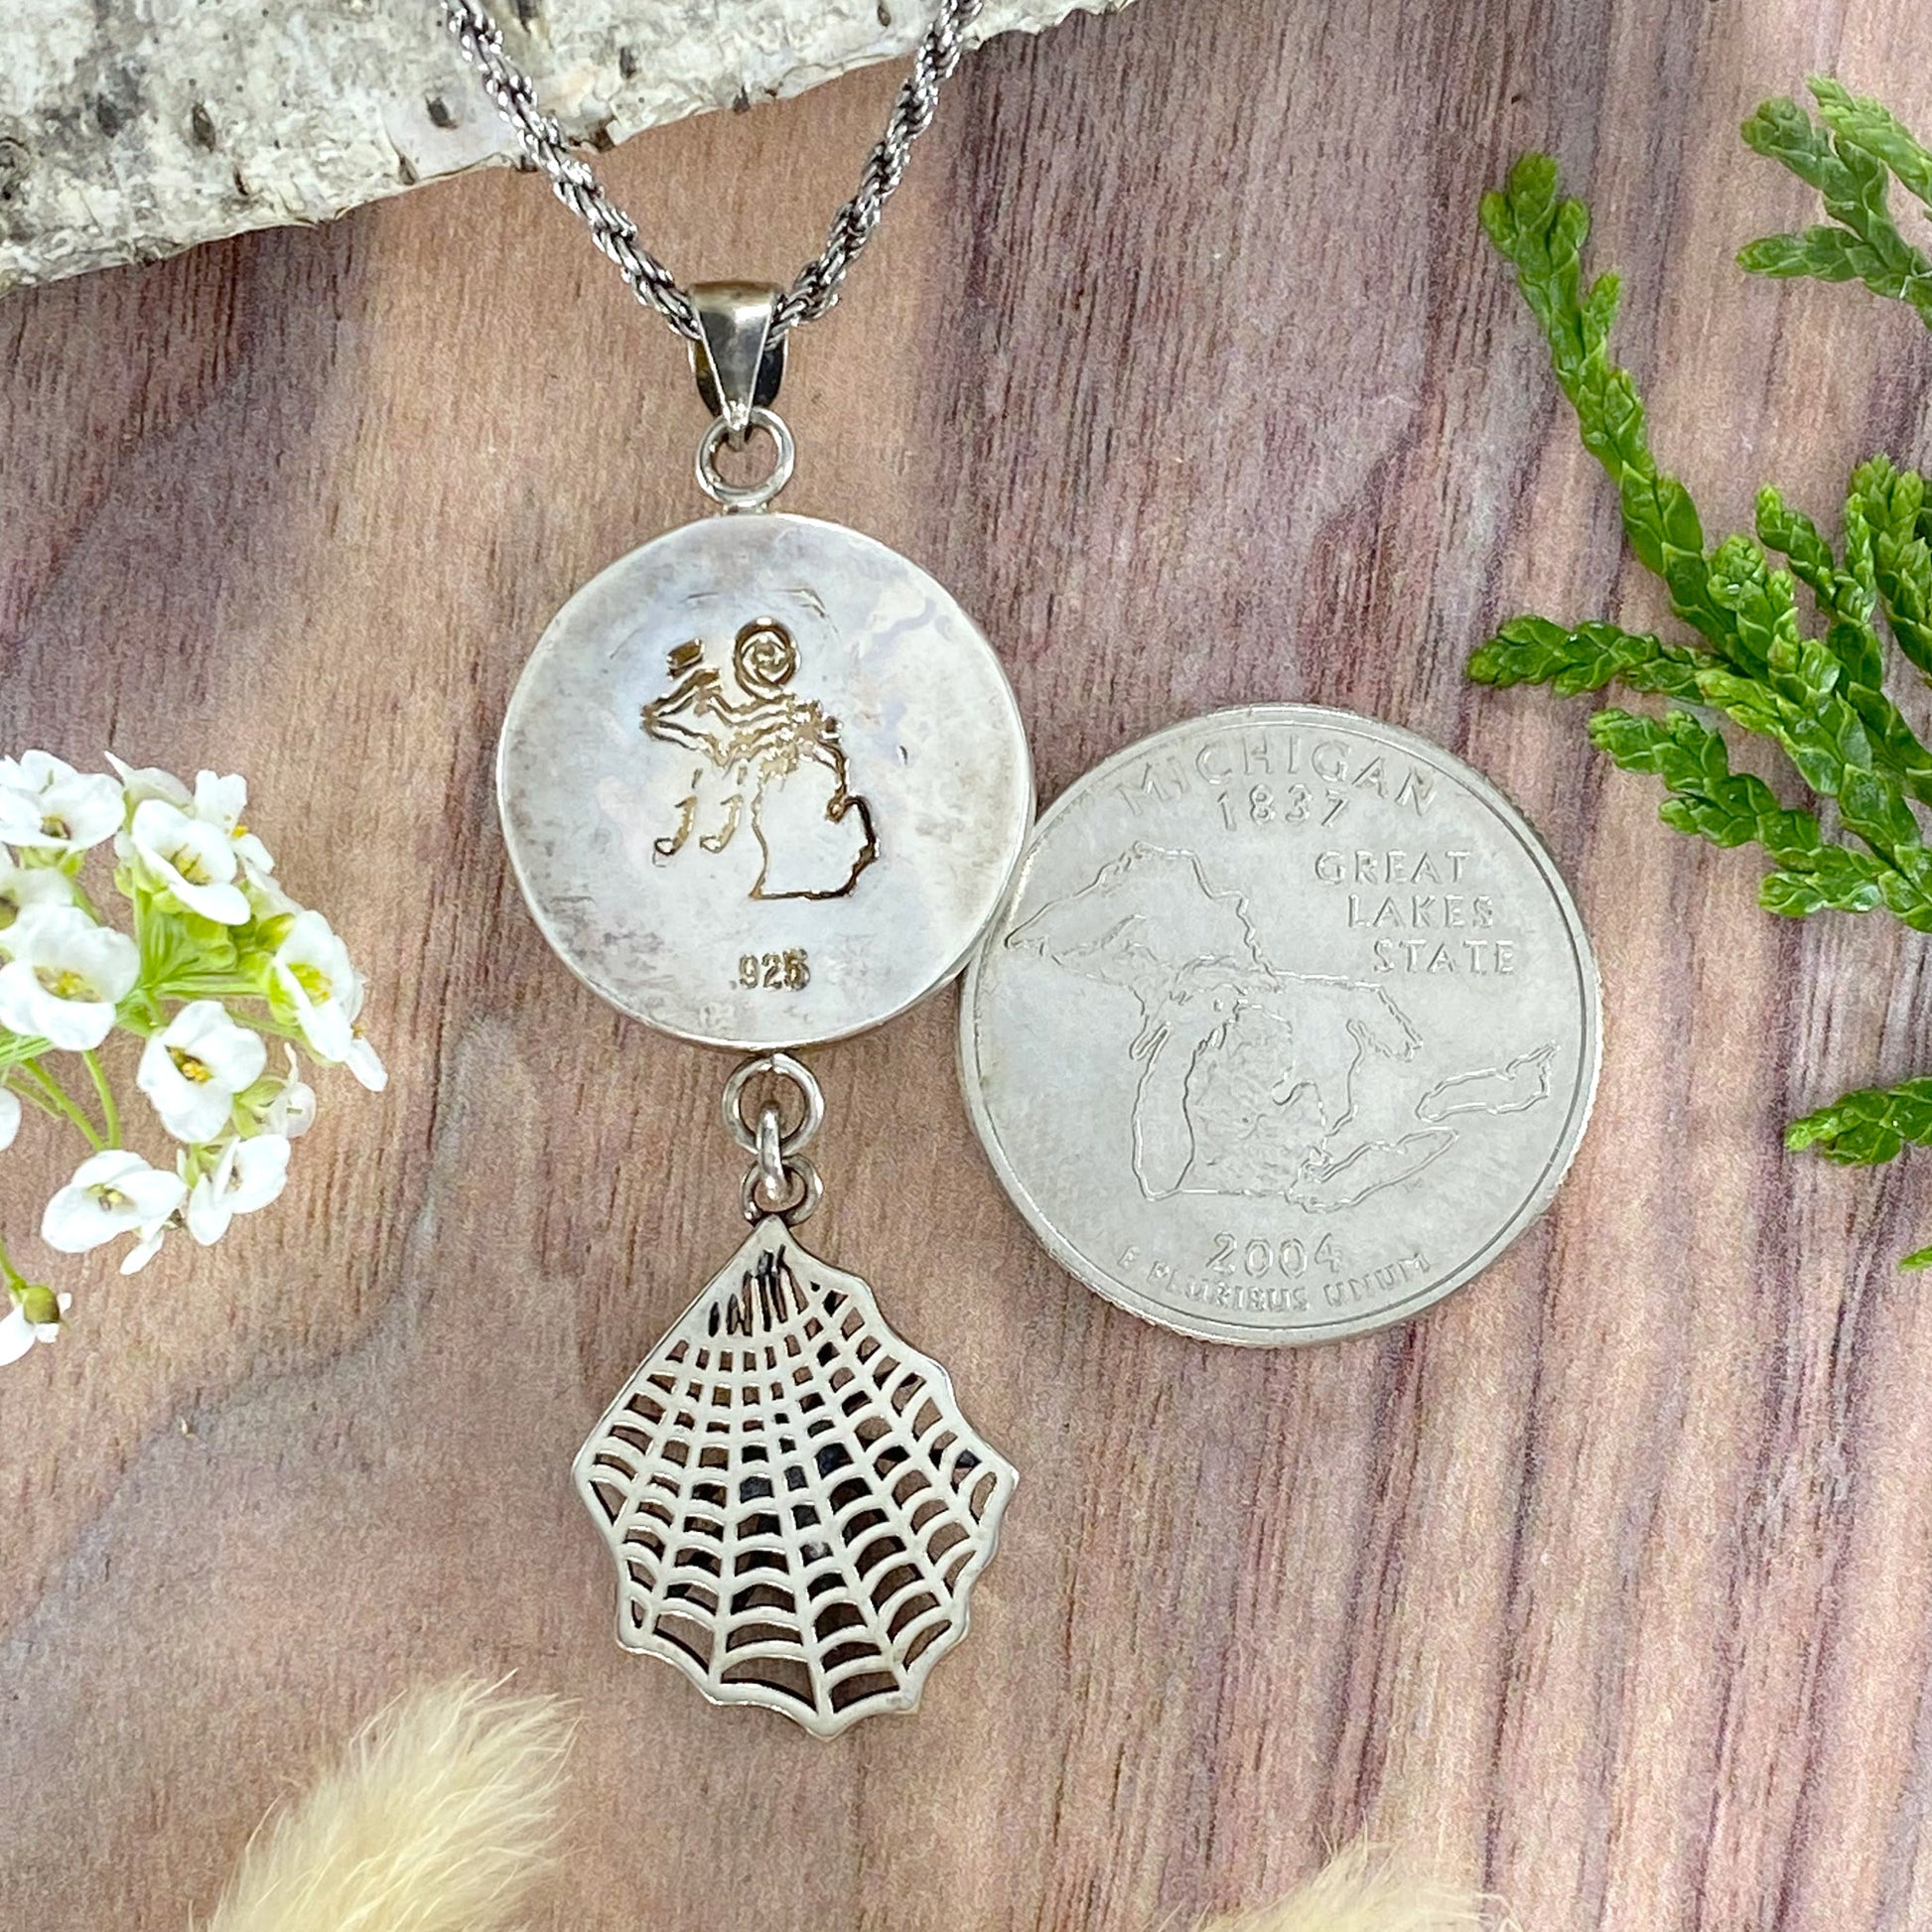 Petoskey Stone with Spider Charm Pendant Necklace Back View - Stone Treasures by the Lake